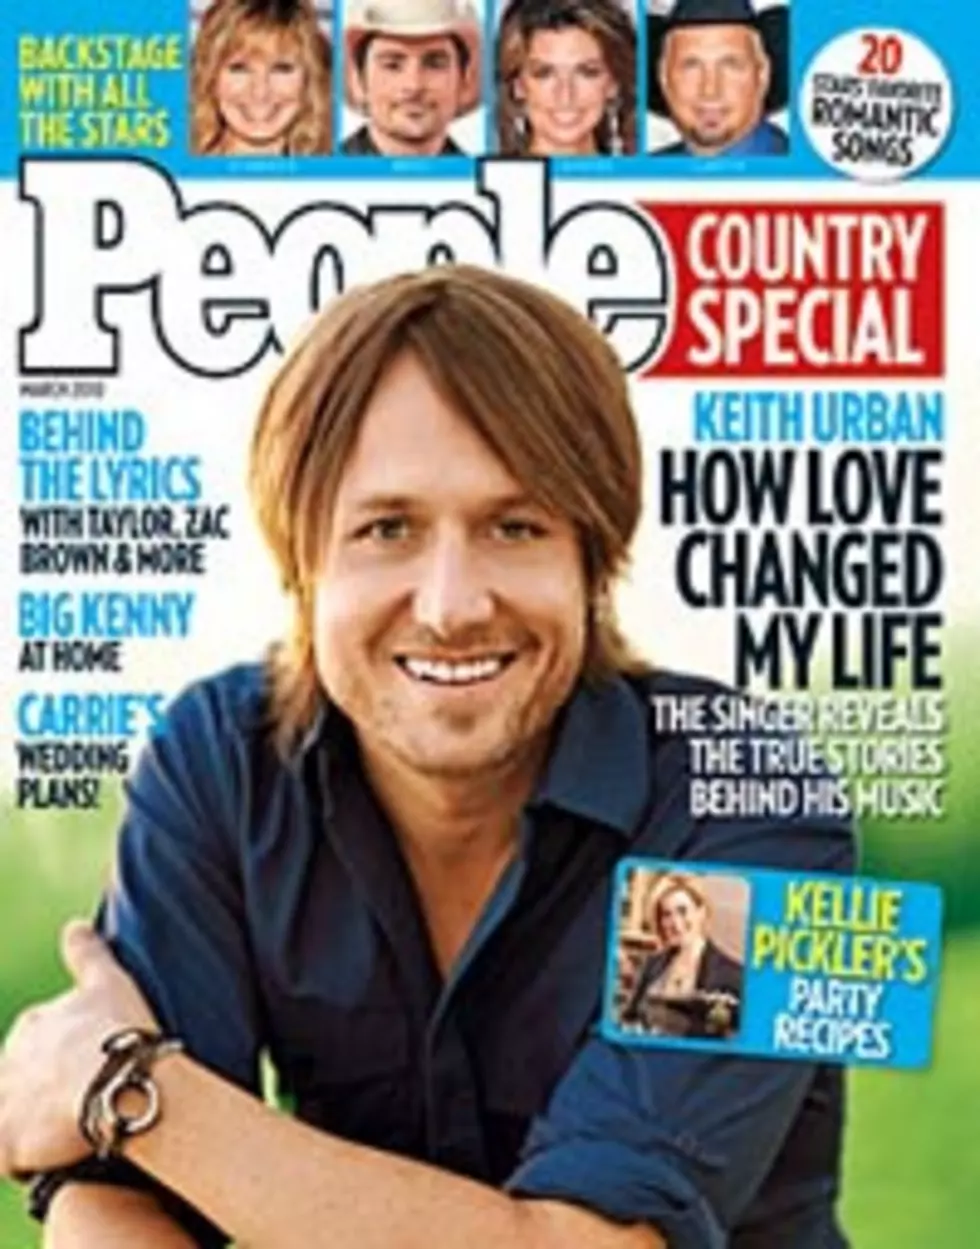 Keith Urban Inspired by Love